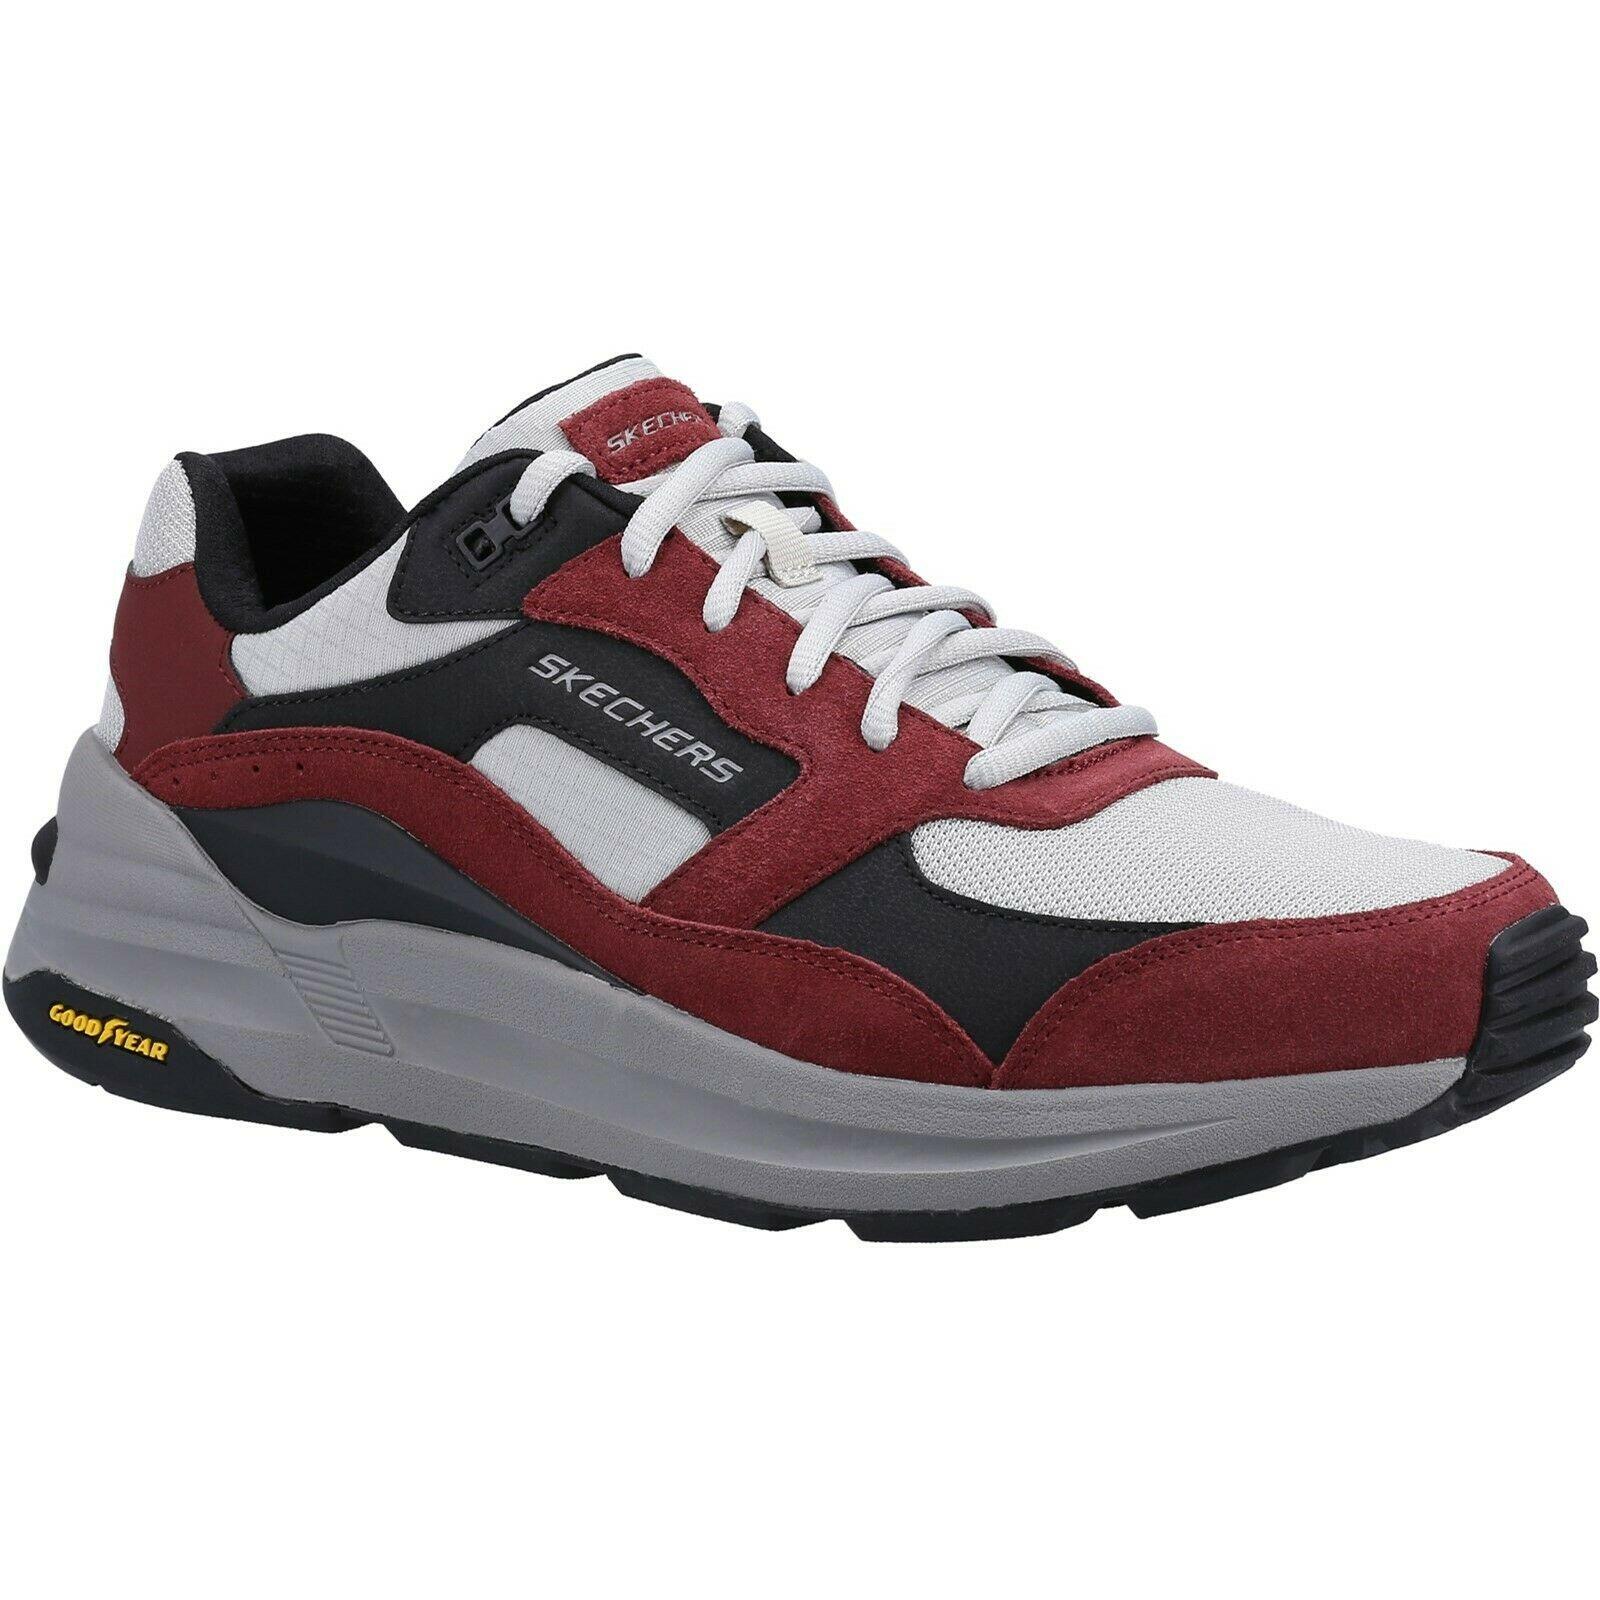 SKECHERS Mens Global Jogger Suede Shoes (Burgundy/Grey/White)